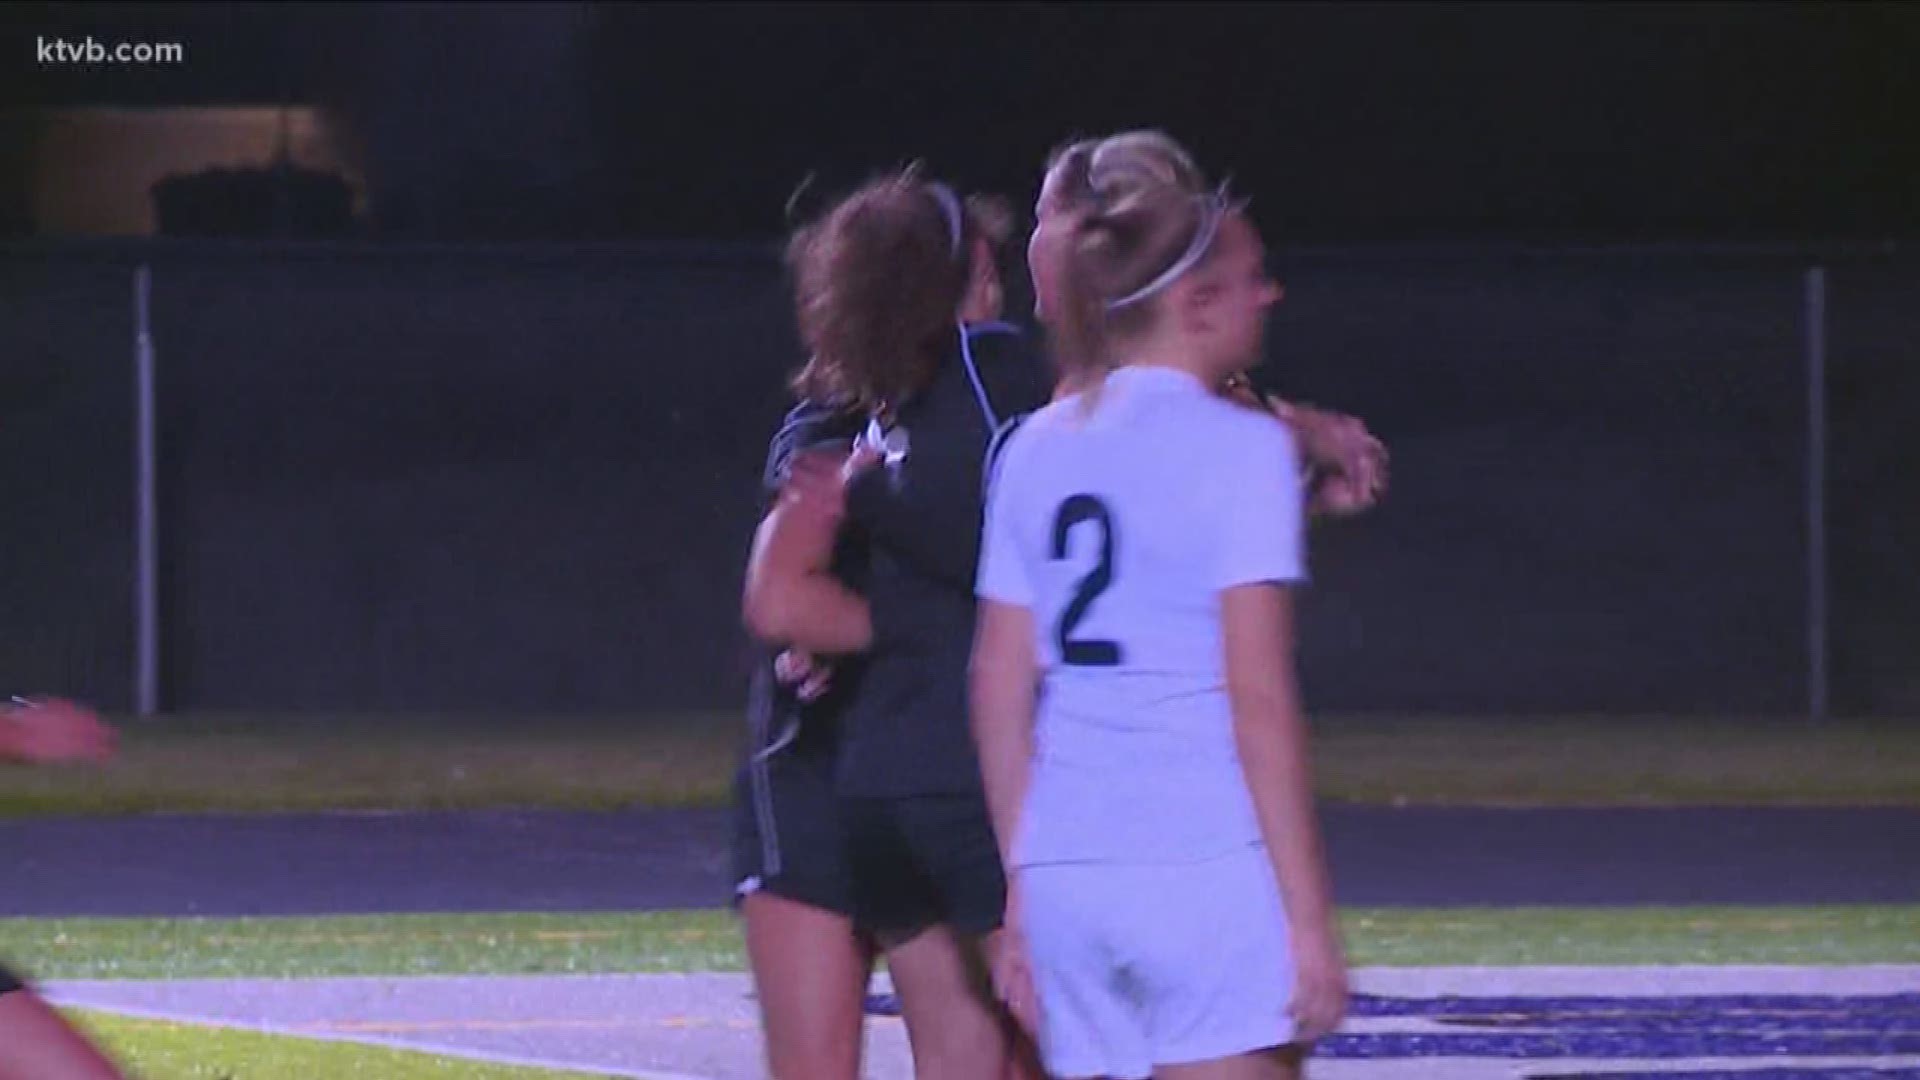 Timberline vs. Mountain View girls district soccer highlights. The Wolves are headed to the state tournament after beating the Mavericks 4-2 in PK's.